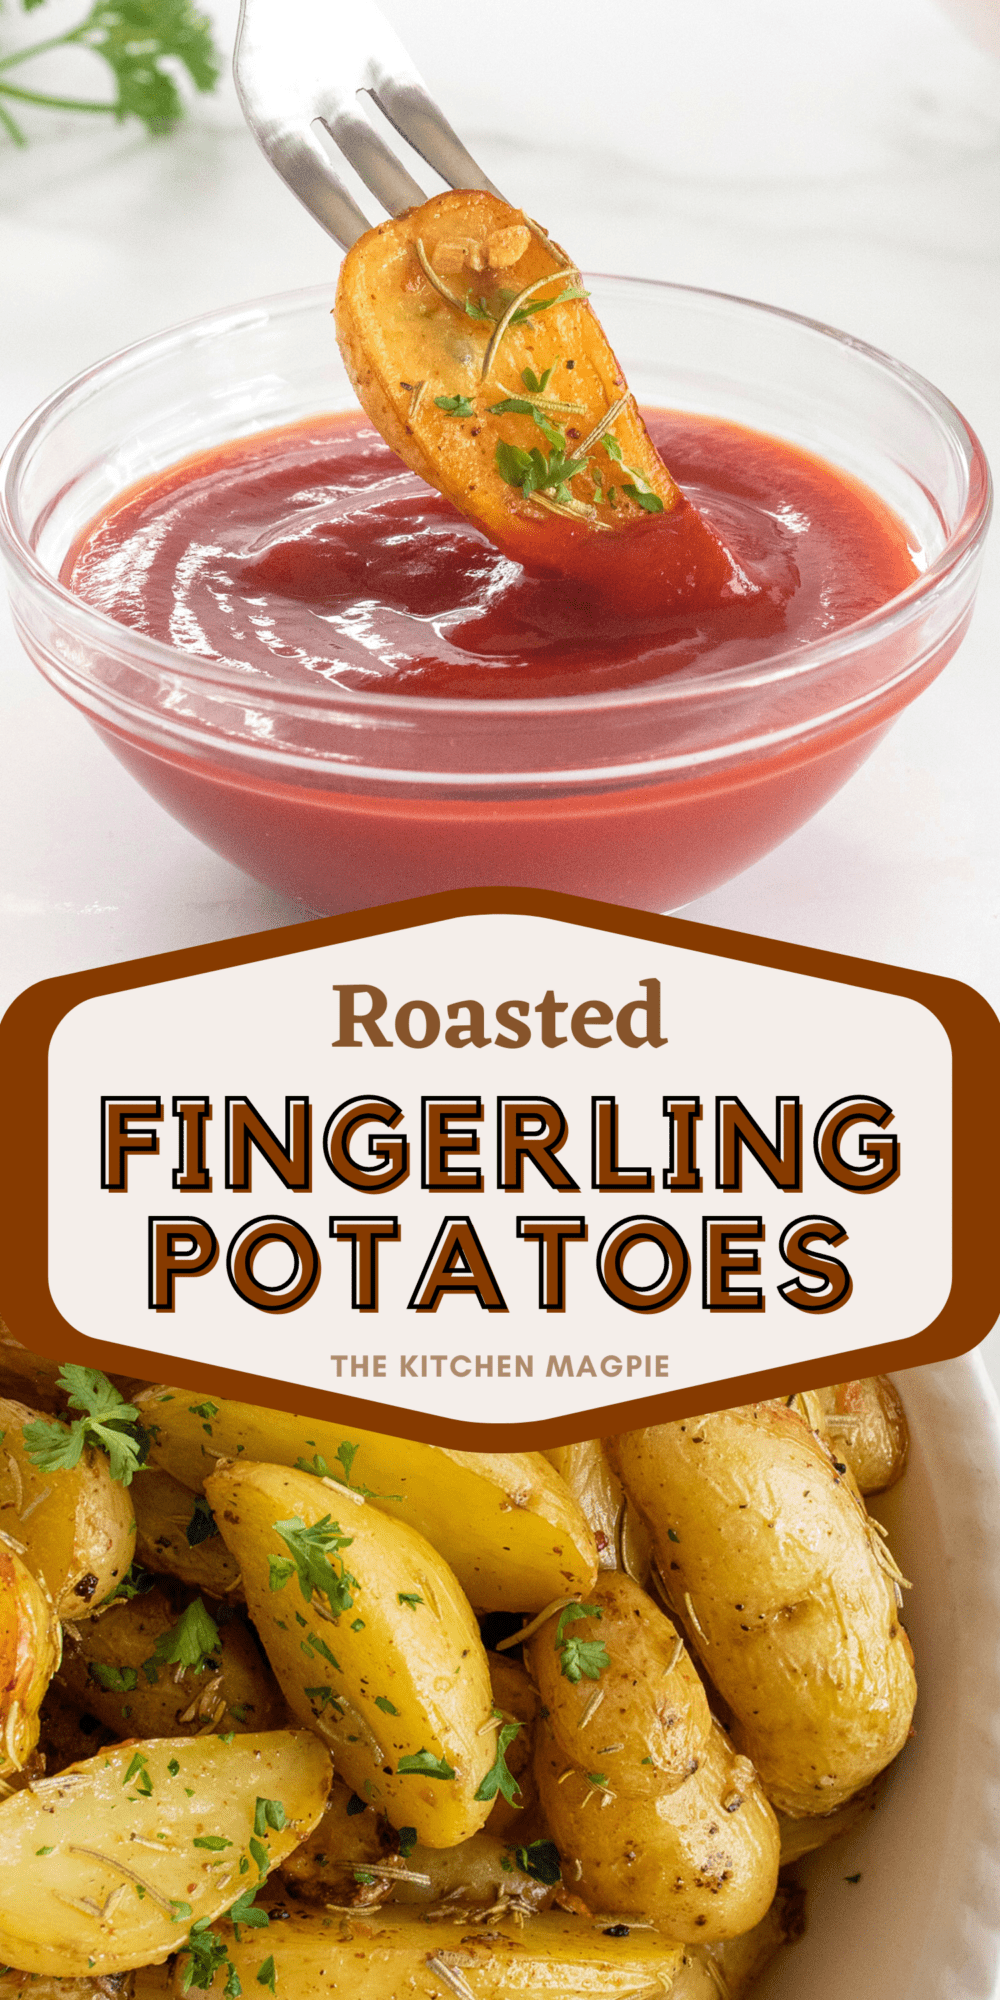 Tender on the inside and bursting with flavor on the crispy outside, these fingerling potatoes are roasted to perfection in a buttery garlic and rosemary mixture.  